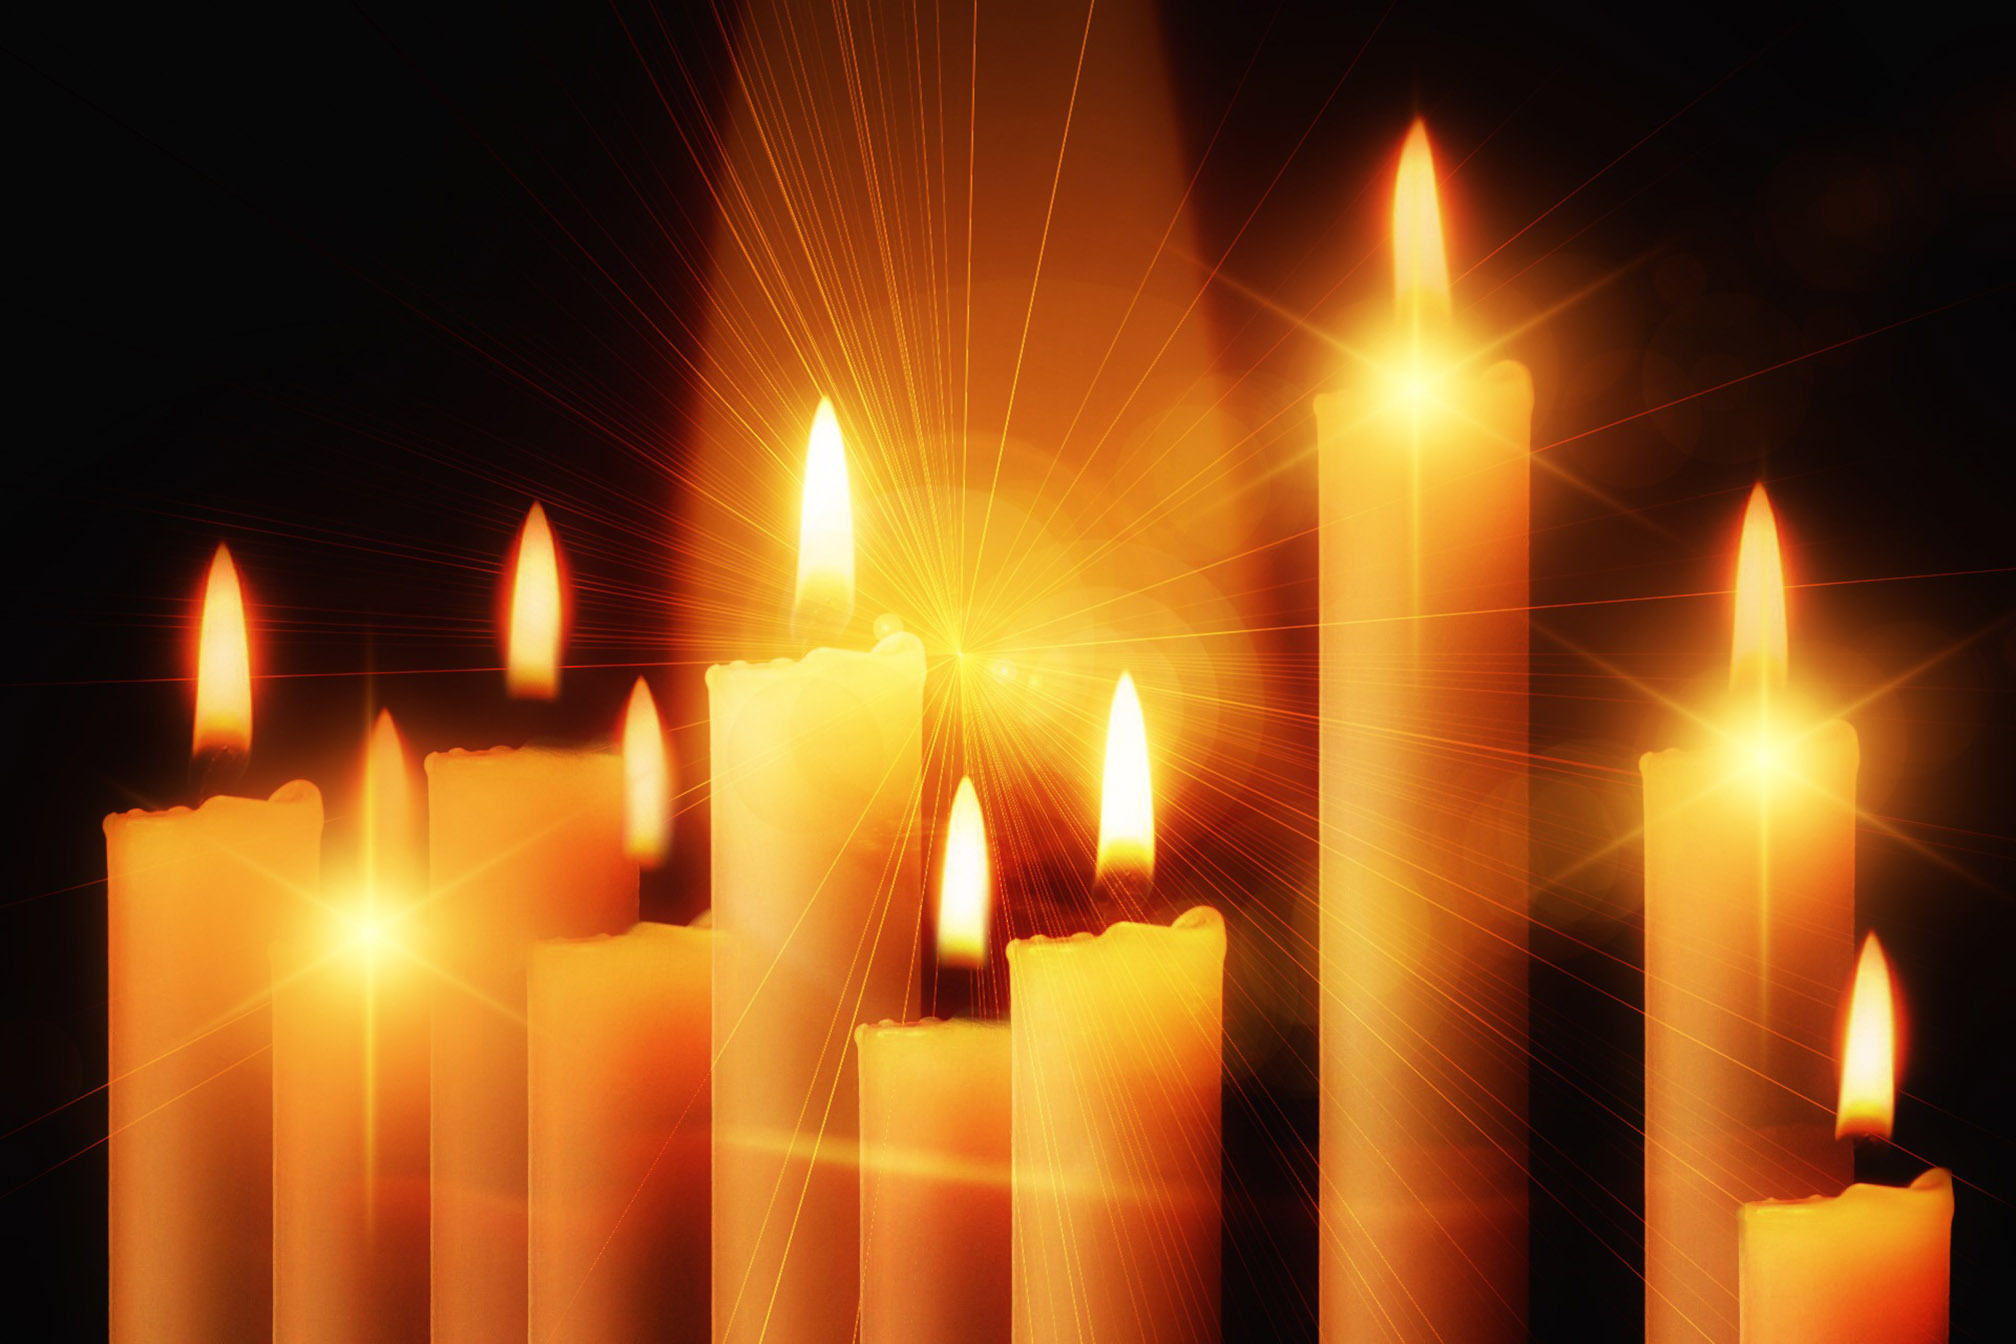 Christmas Wallpaper And Background Image With More Candle